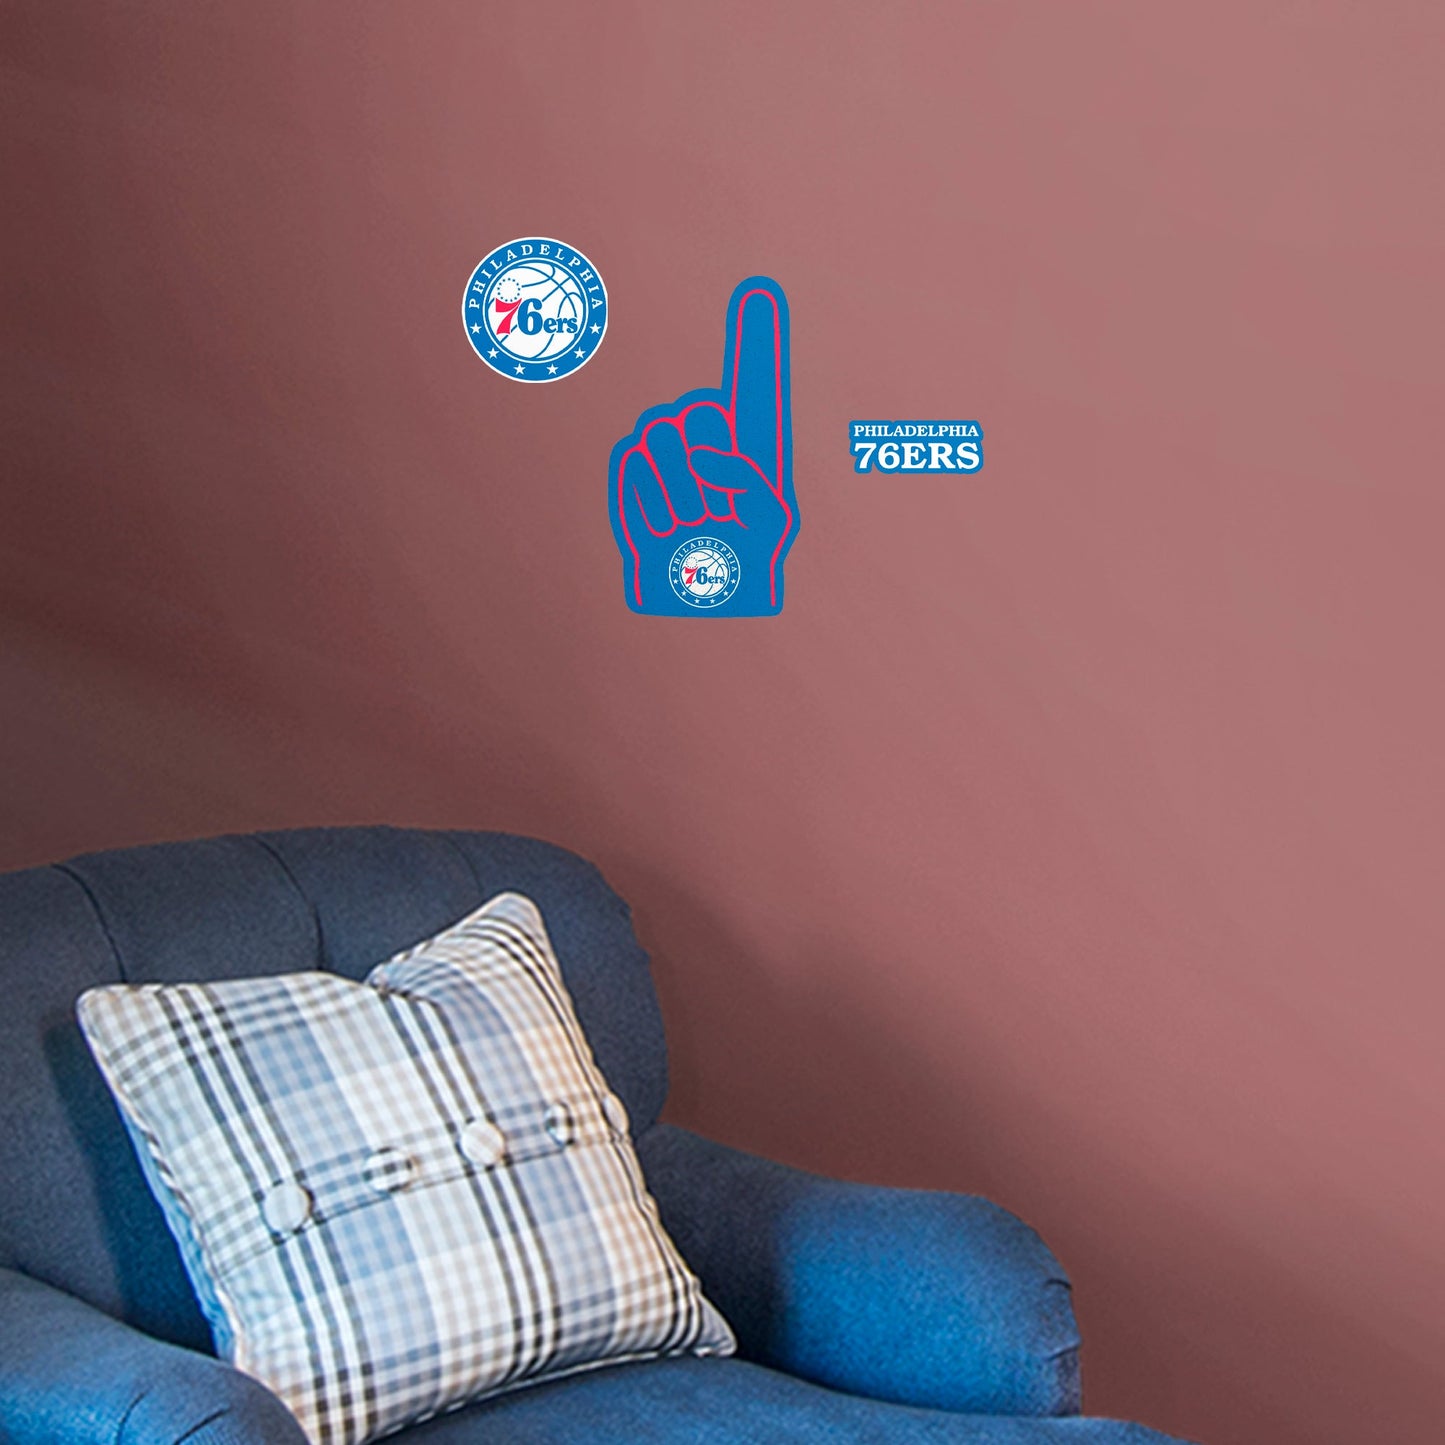 Philadelphia 76ers: Foam Finger - Officially Licensed NBA Removable Adhesive Decal